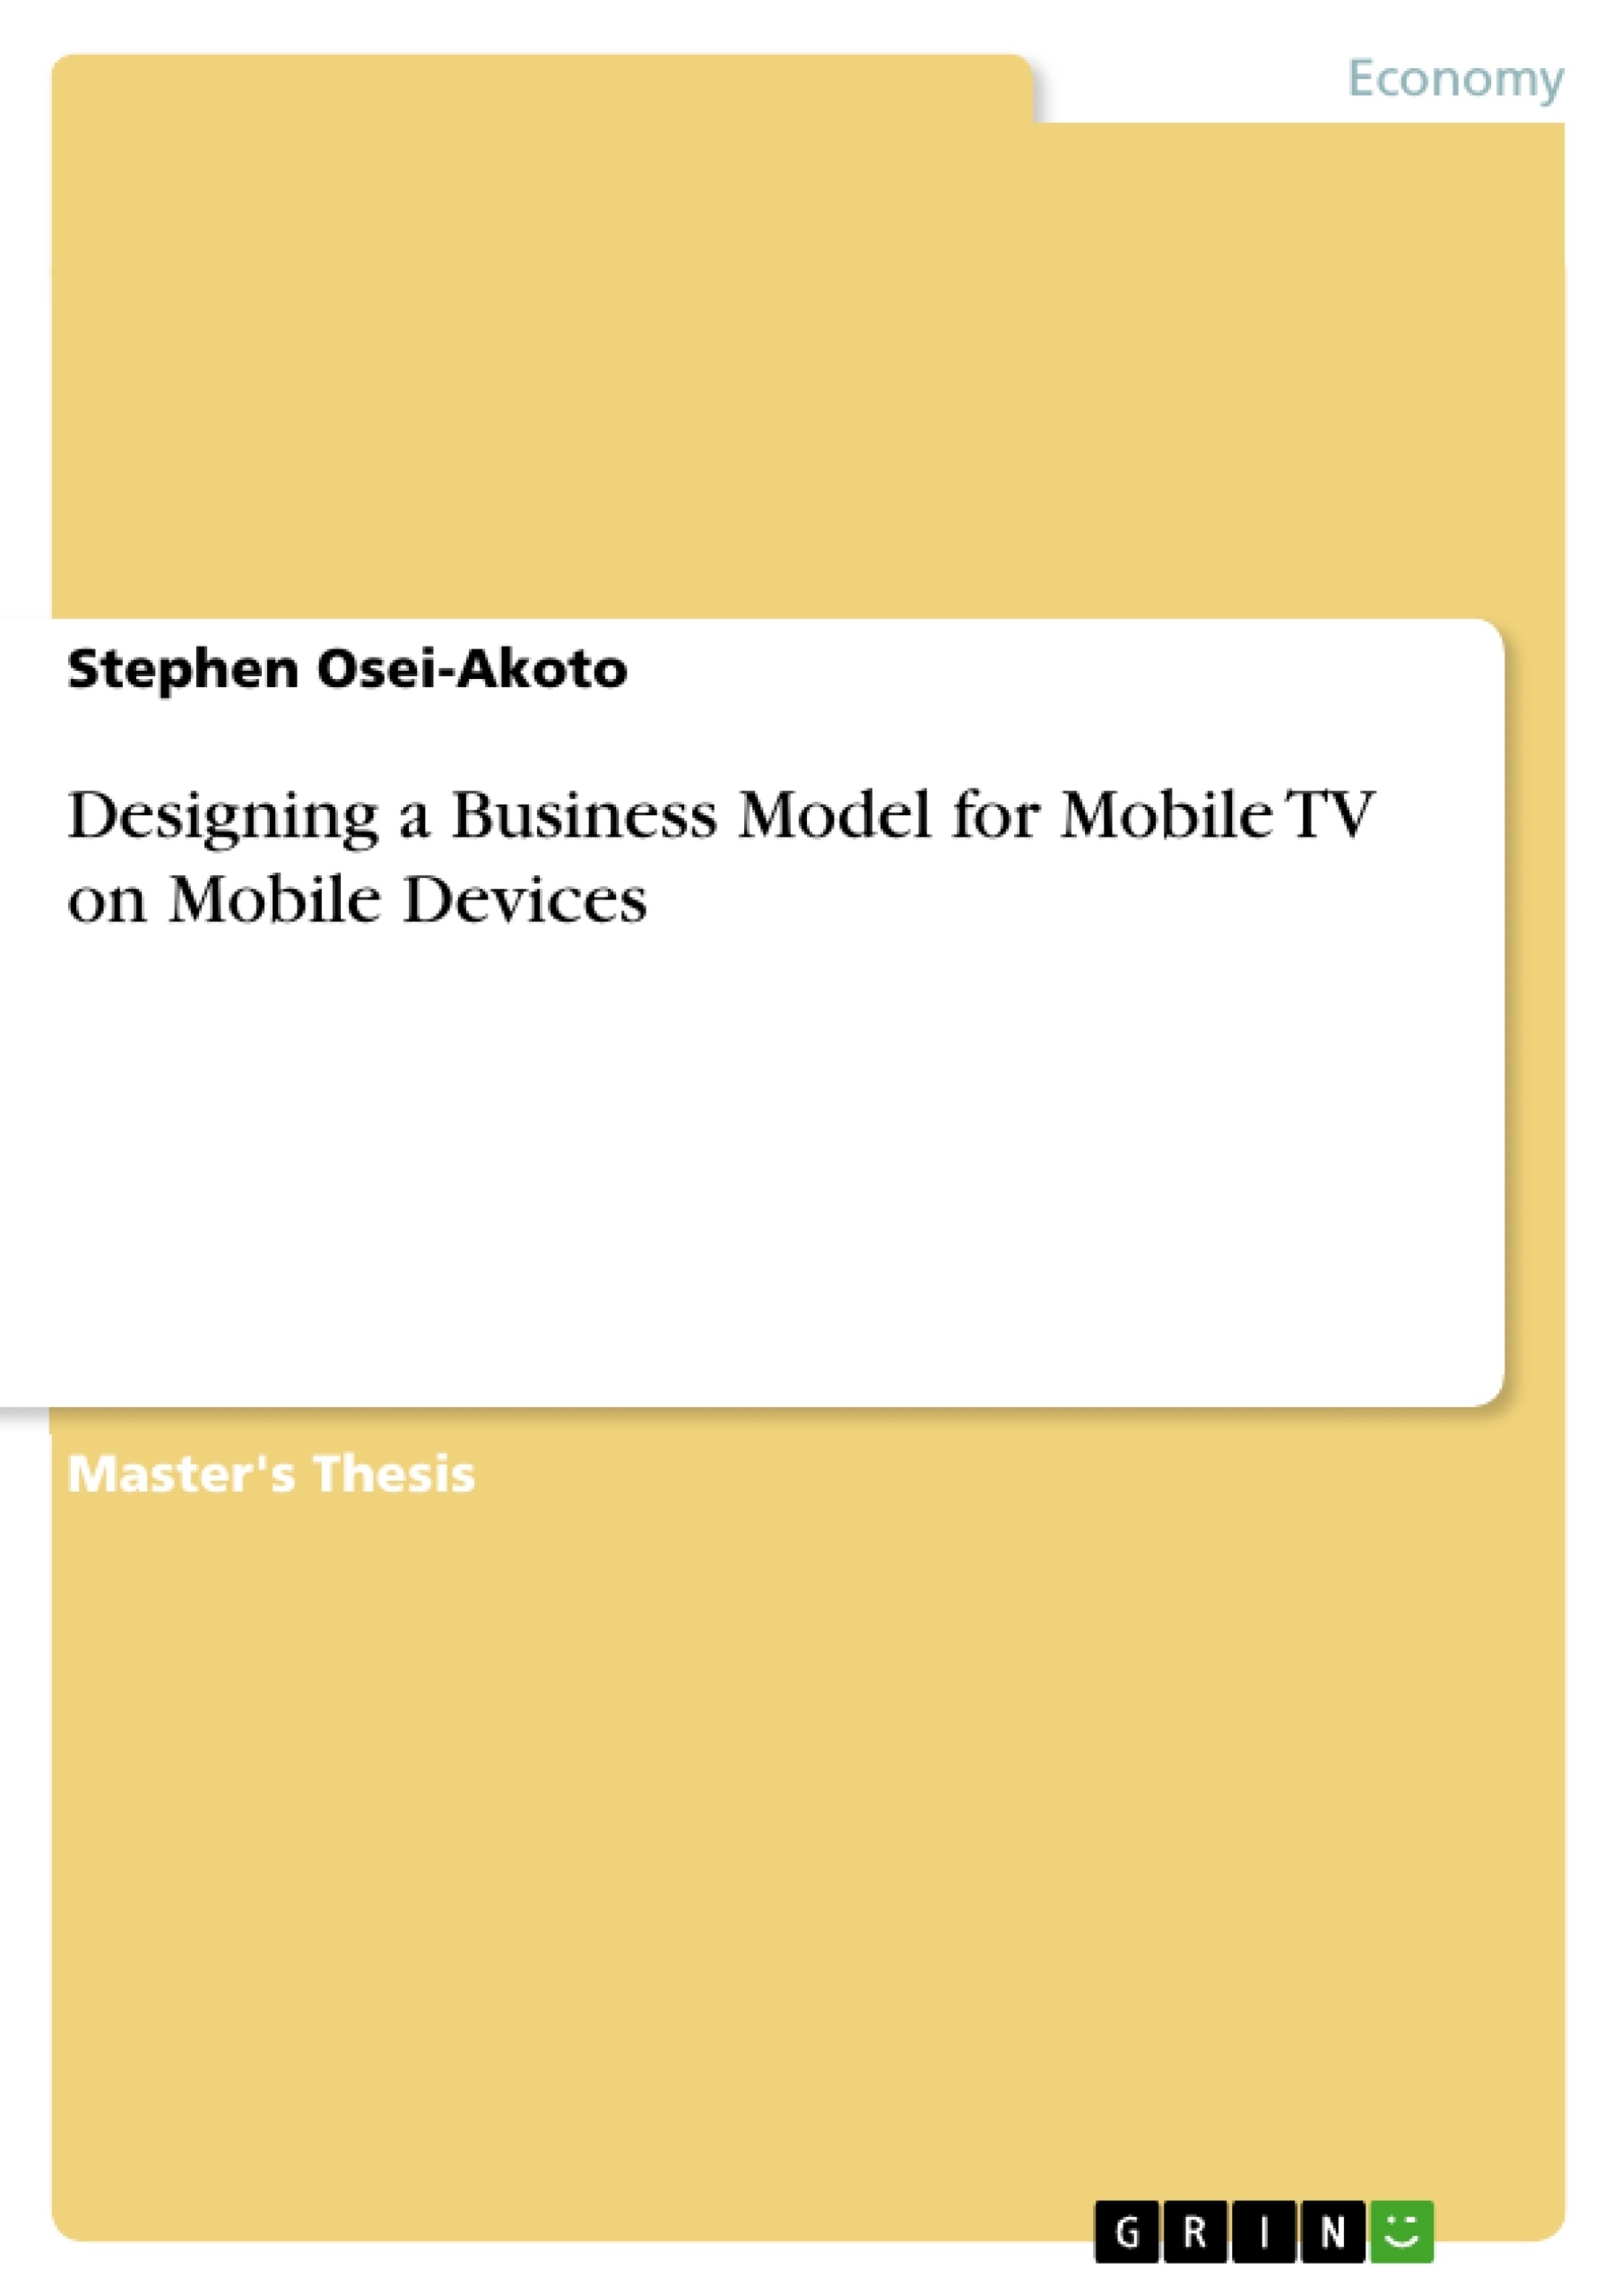 Título: Designing a Business Model for Mobile TV on Mobile Devices